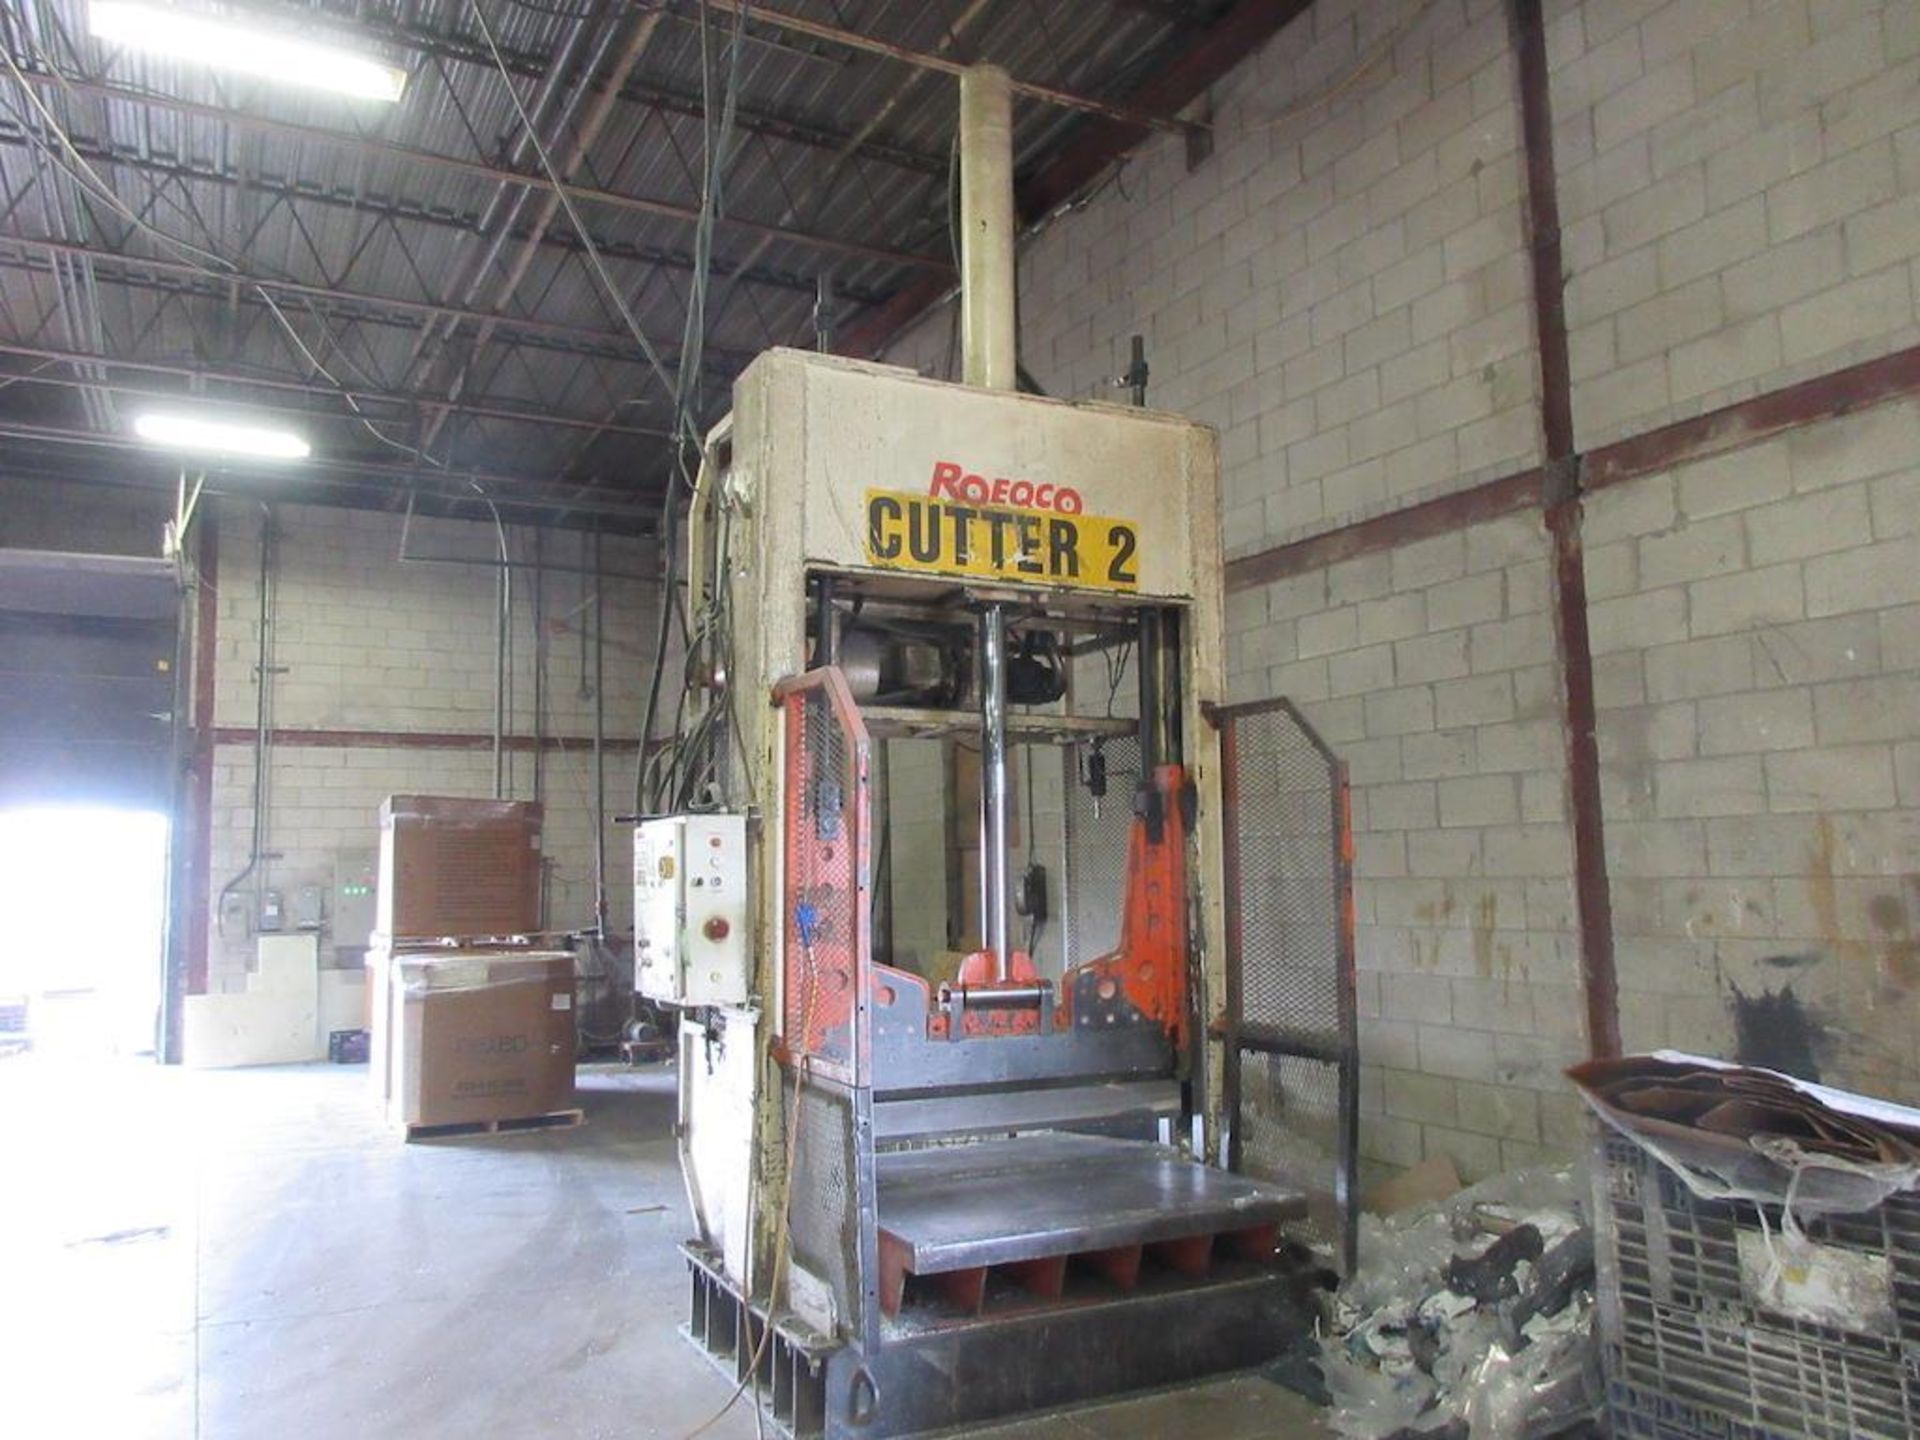 2001 ROEQCO (Rolling Equipment Company Inc) Guillotine, 5' blade, Model HS 115-66-218, sn 115-01-01-